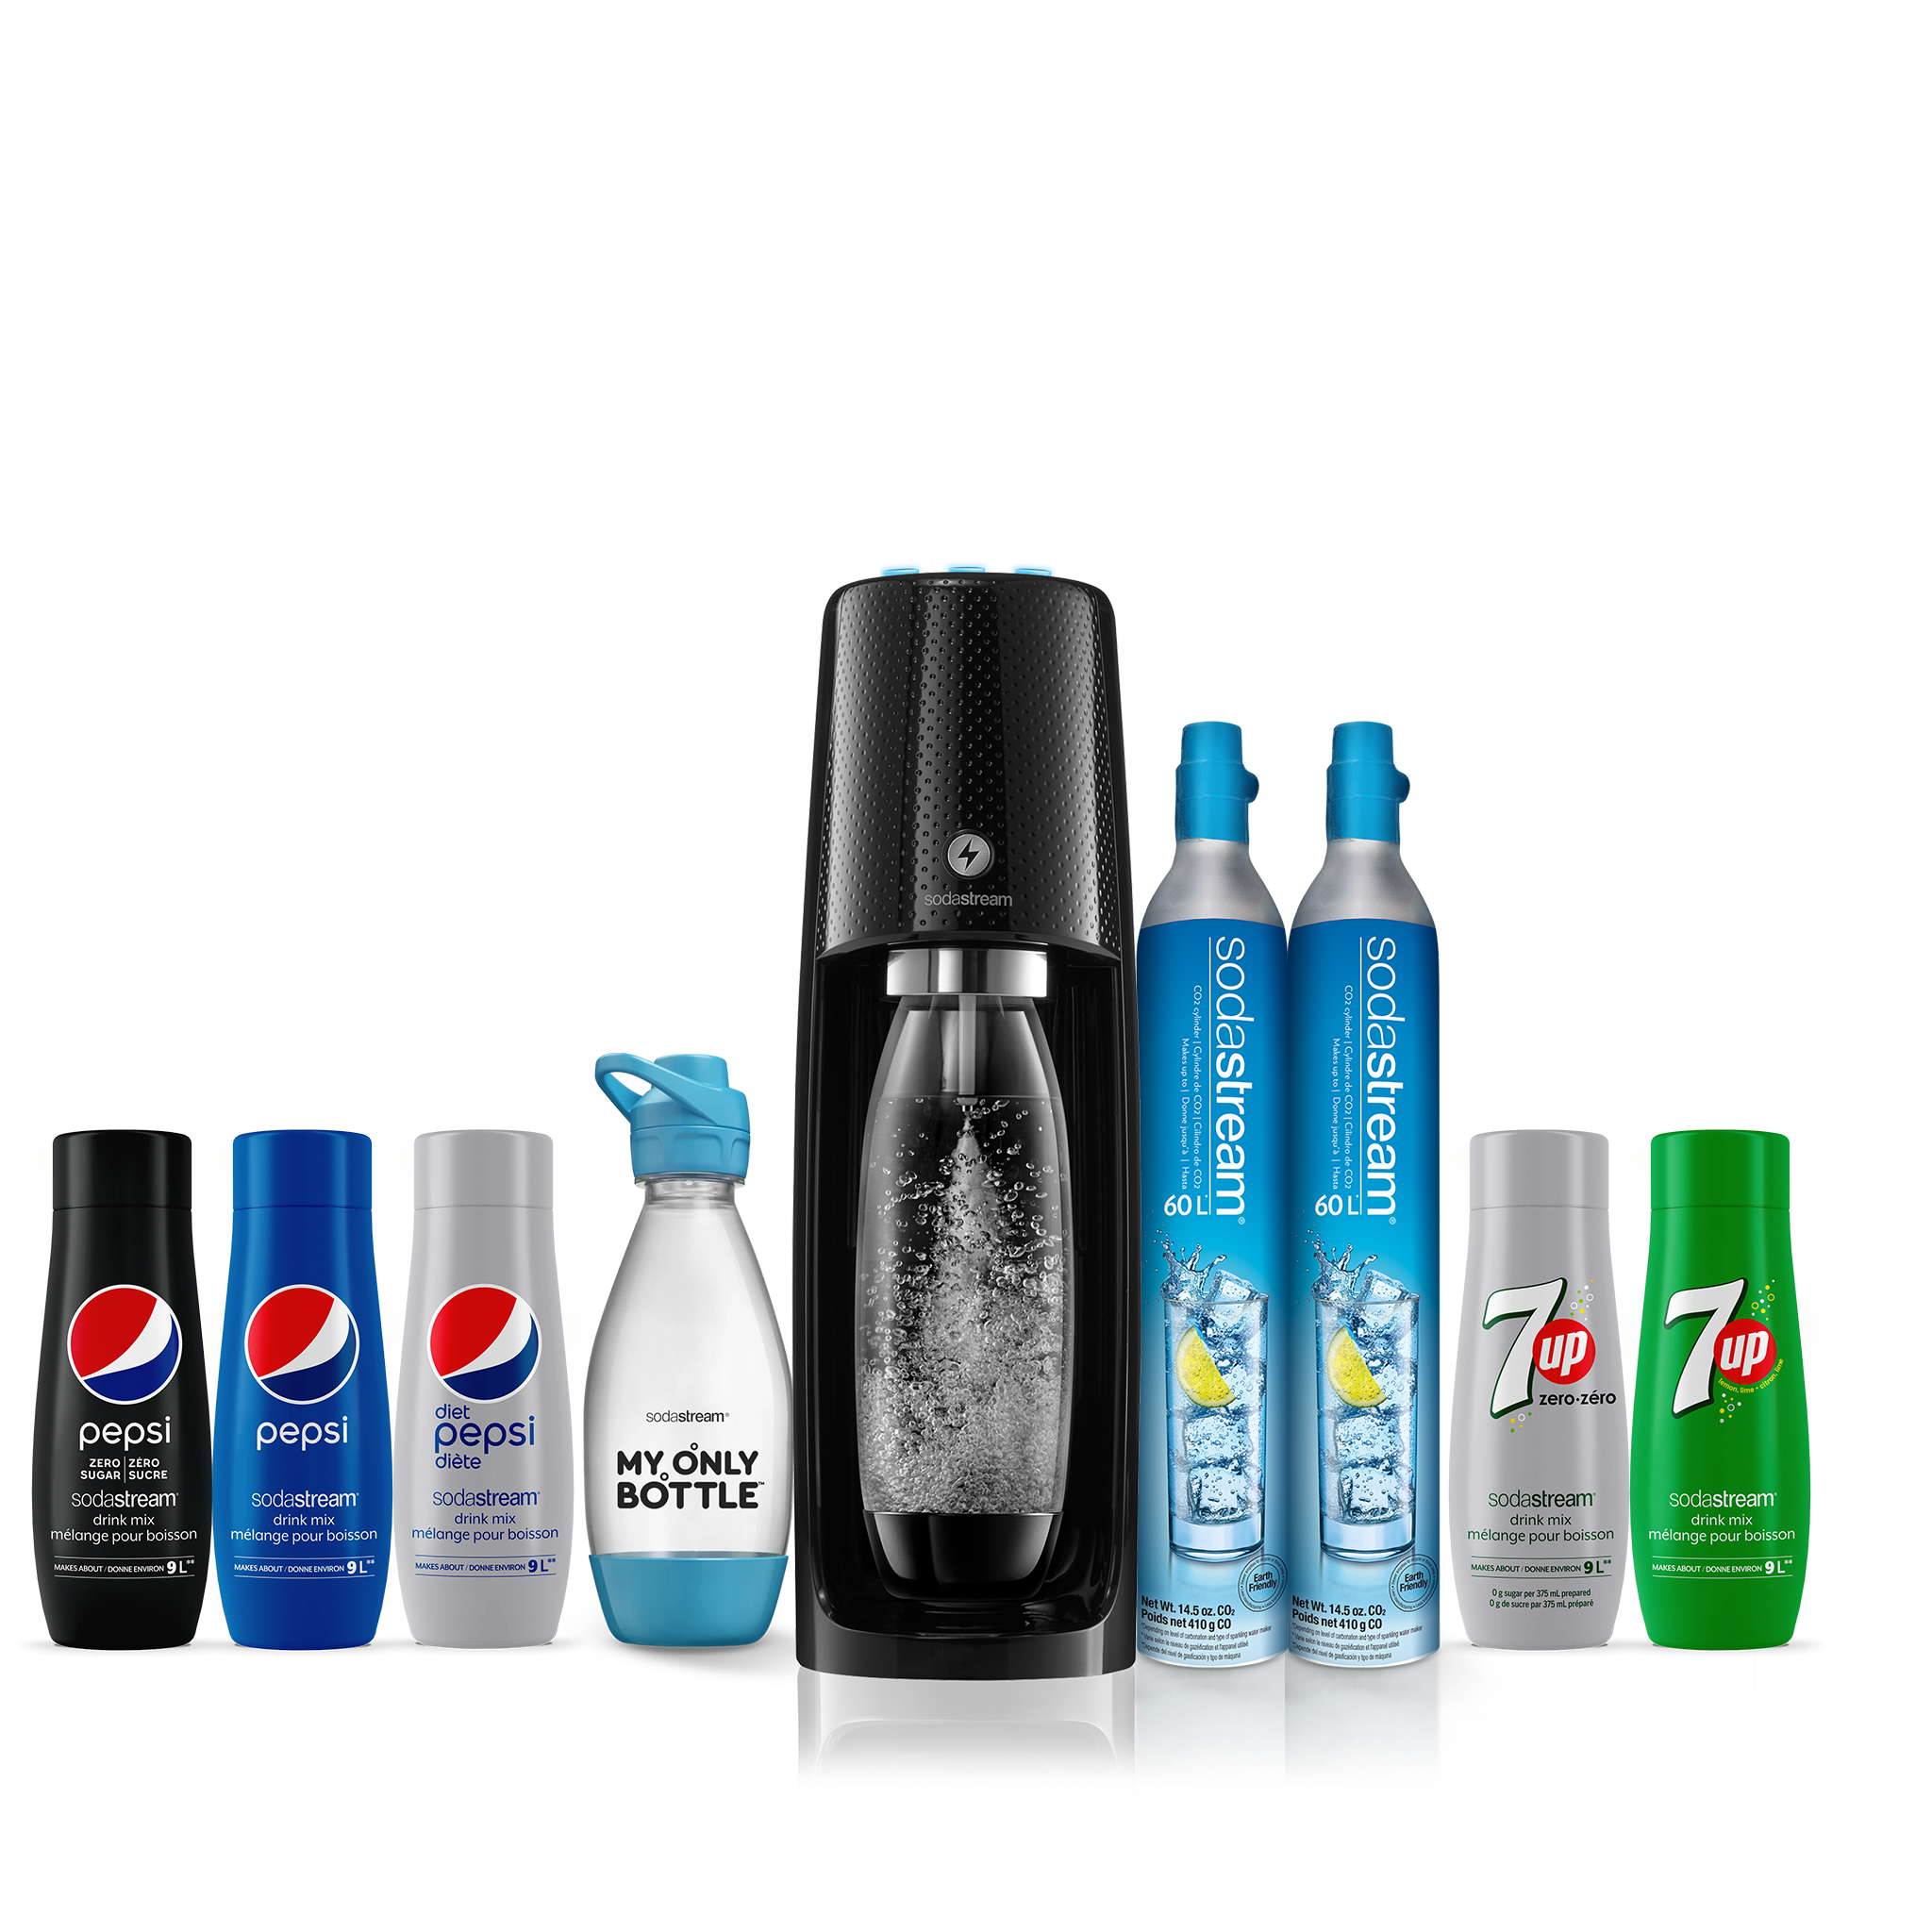 One Touch sodastream